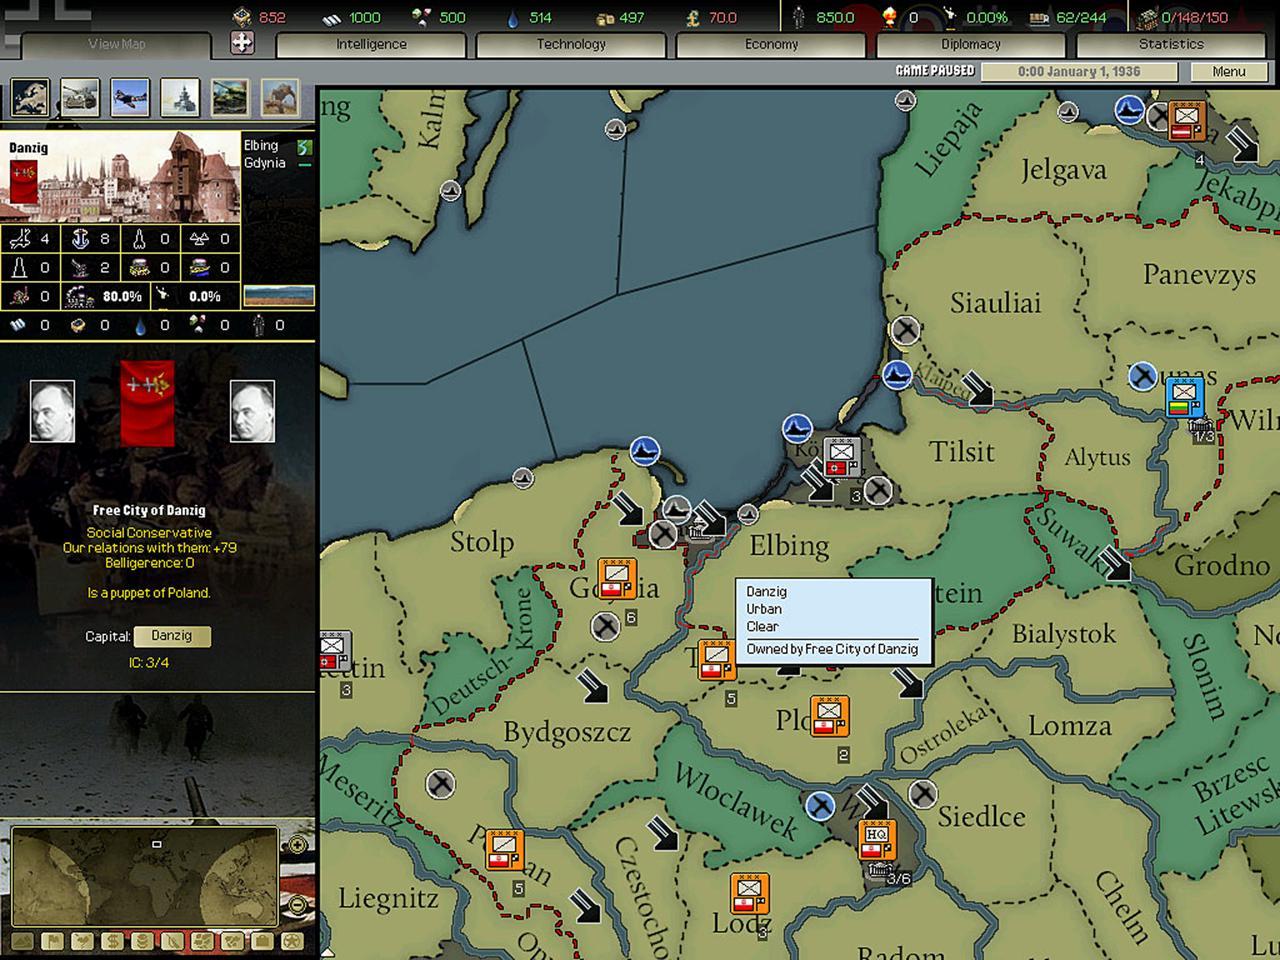 darkest hour a hearts of iron game review